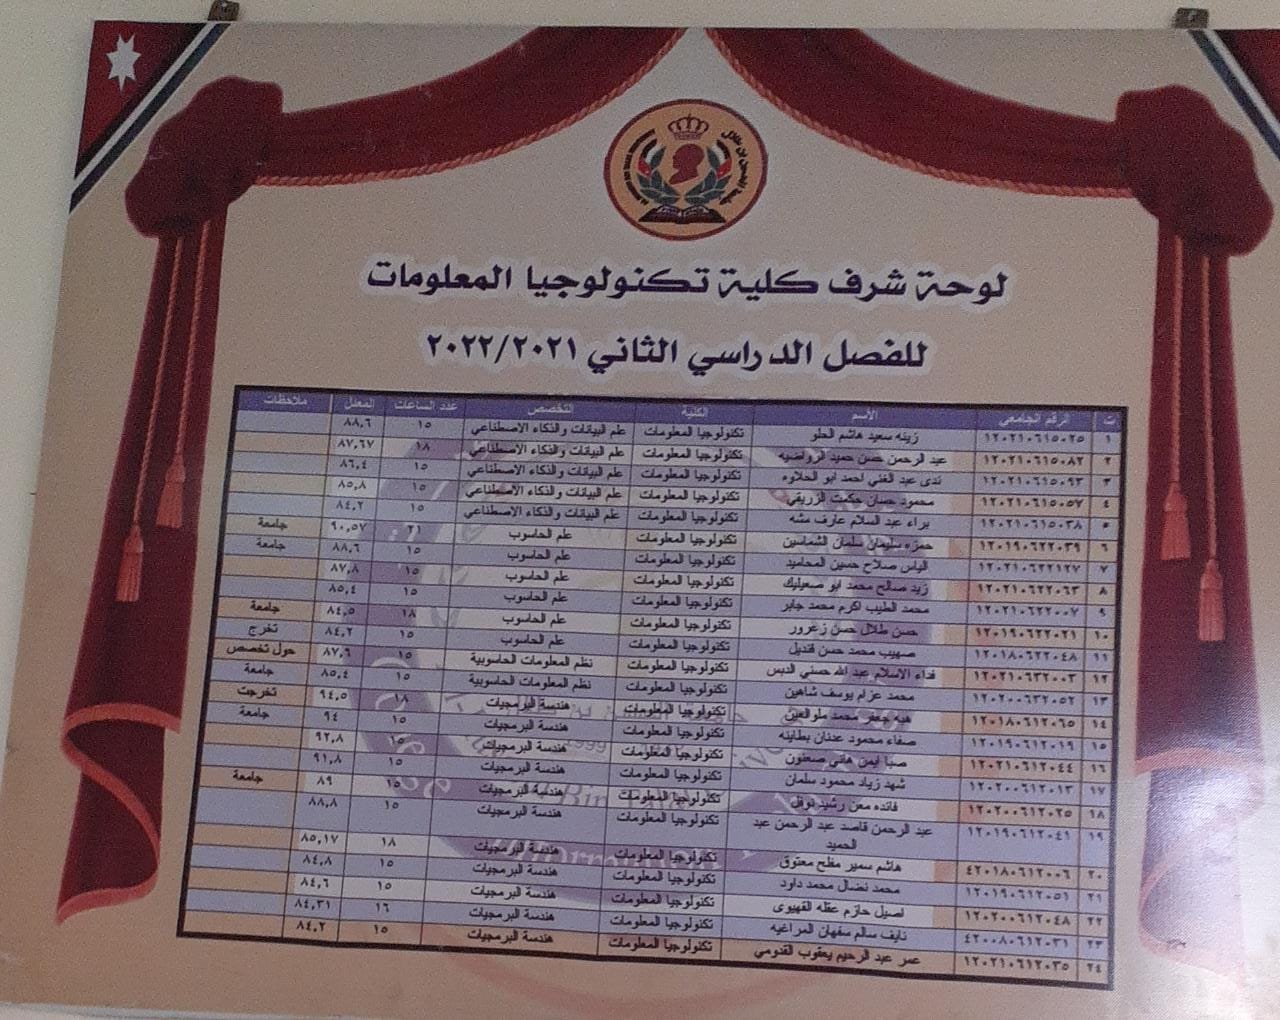 Faculty of Information Technology honor board for the second semester of the academic year 2021/2022